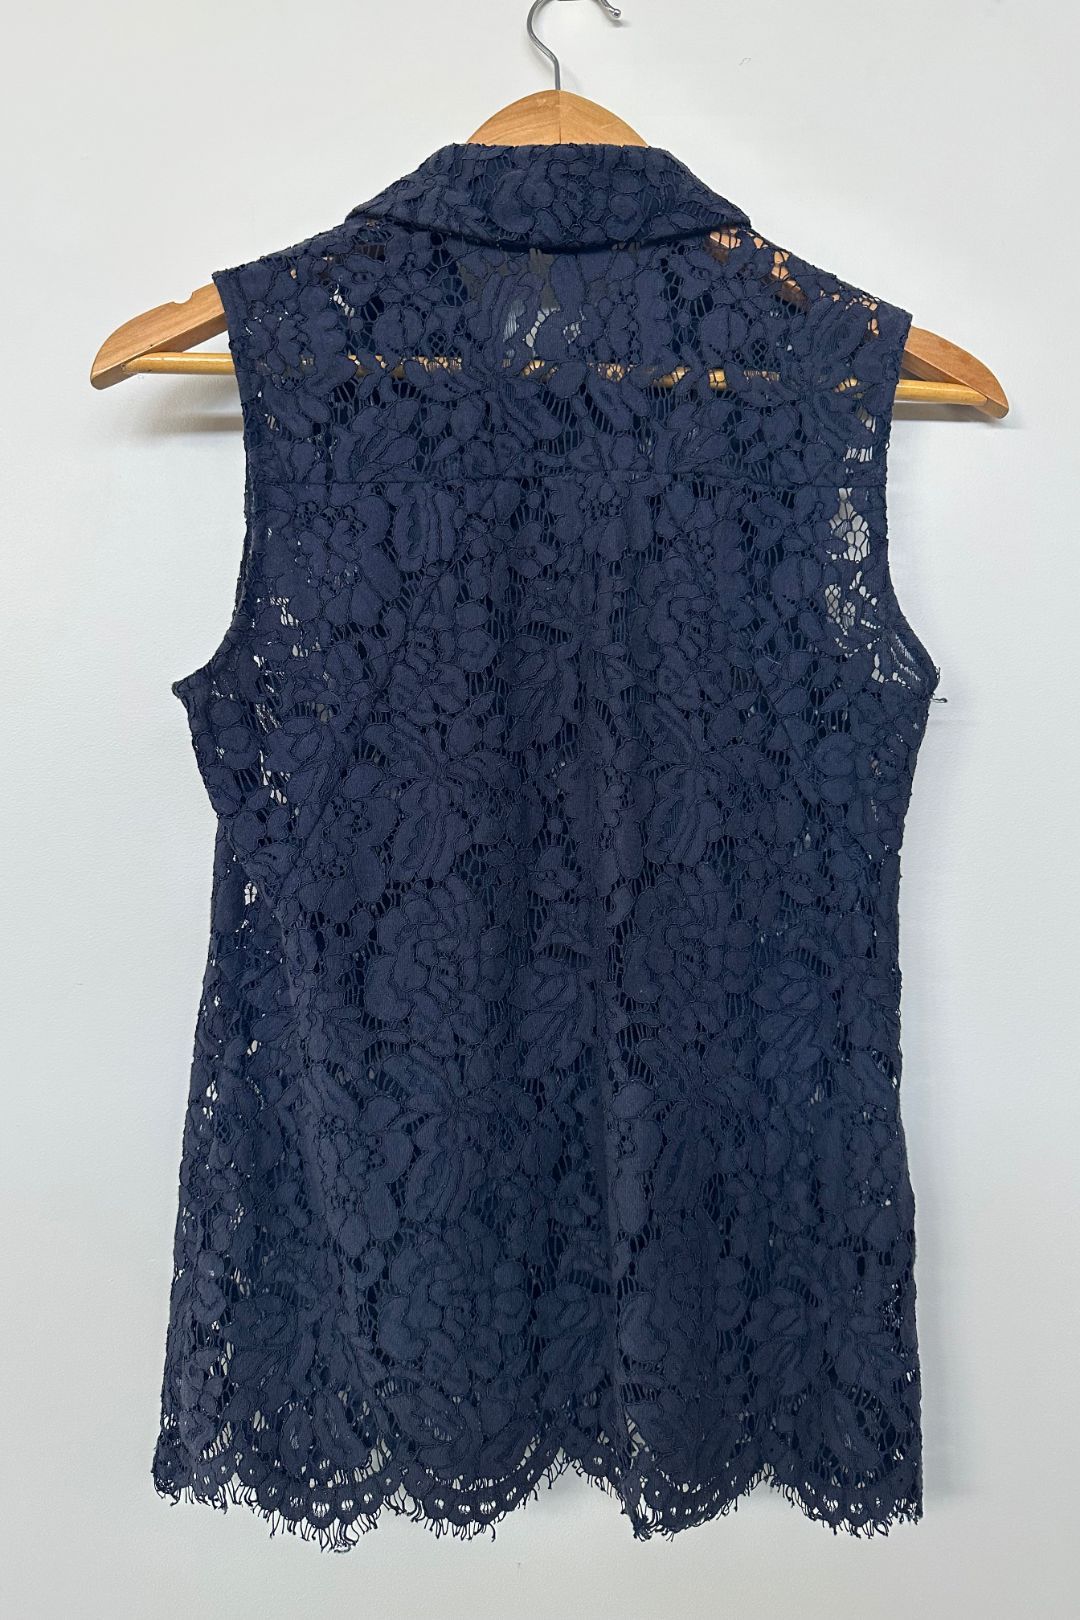 Cue Sleeveless Lace Shirt in Navy